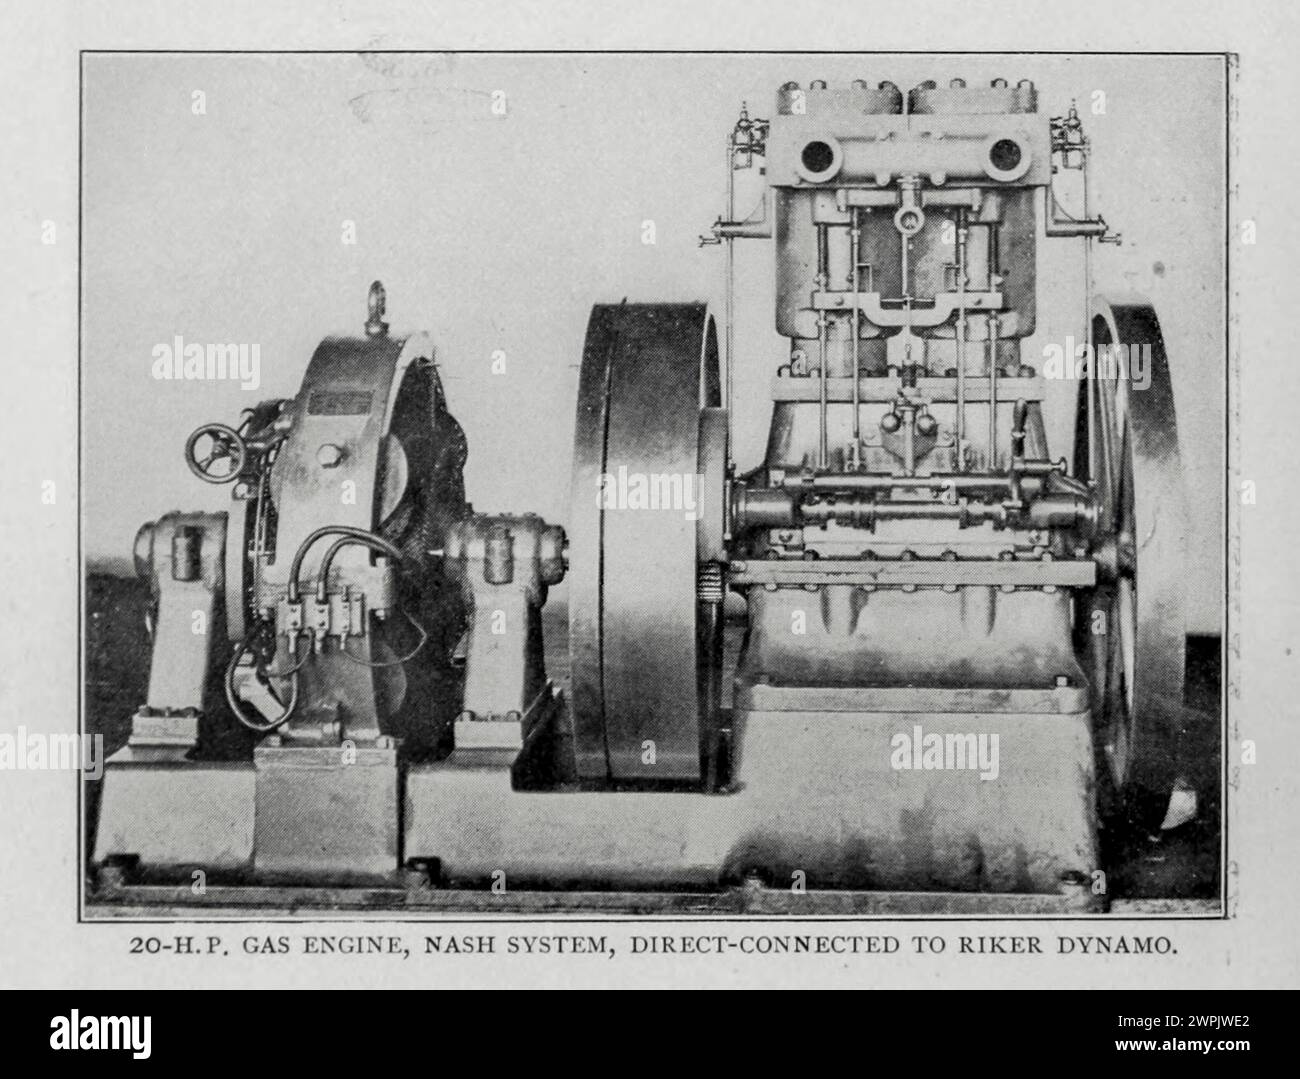 20-H.P. Gas Engine Nash system, direct-connected to Riker dynamo from the Article THE GAS ENGINE IN AMERICAN PRACTICE. By George Richmond from The Engineering Magazine Devoted to Industrial Progress Volume XV 1898 The Engineering Magazine Co Stock Photo